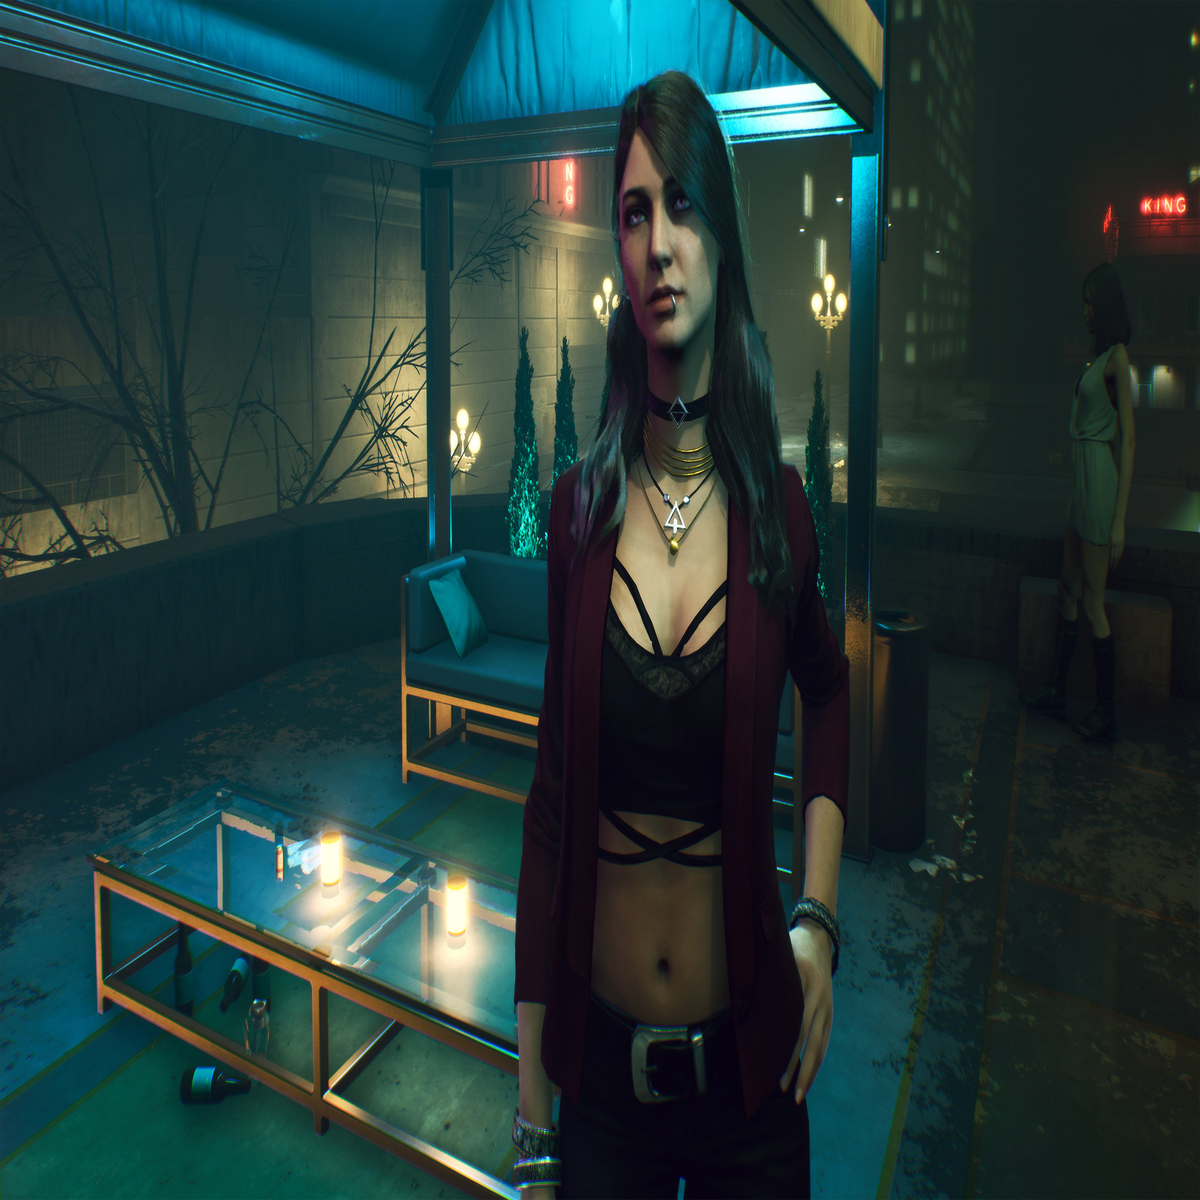 Vampire: The Masquerade - Bloodlines 2 for Xbox Series X